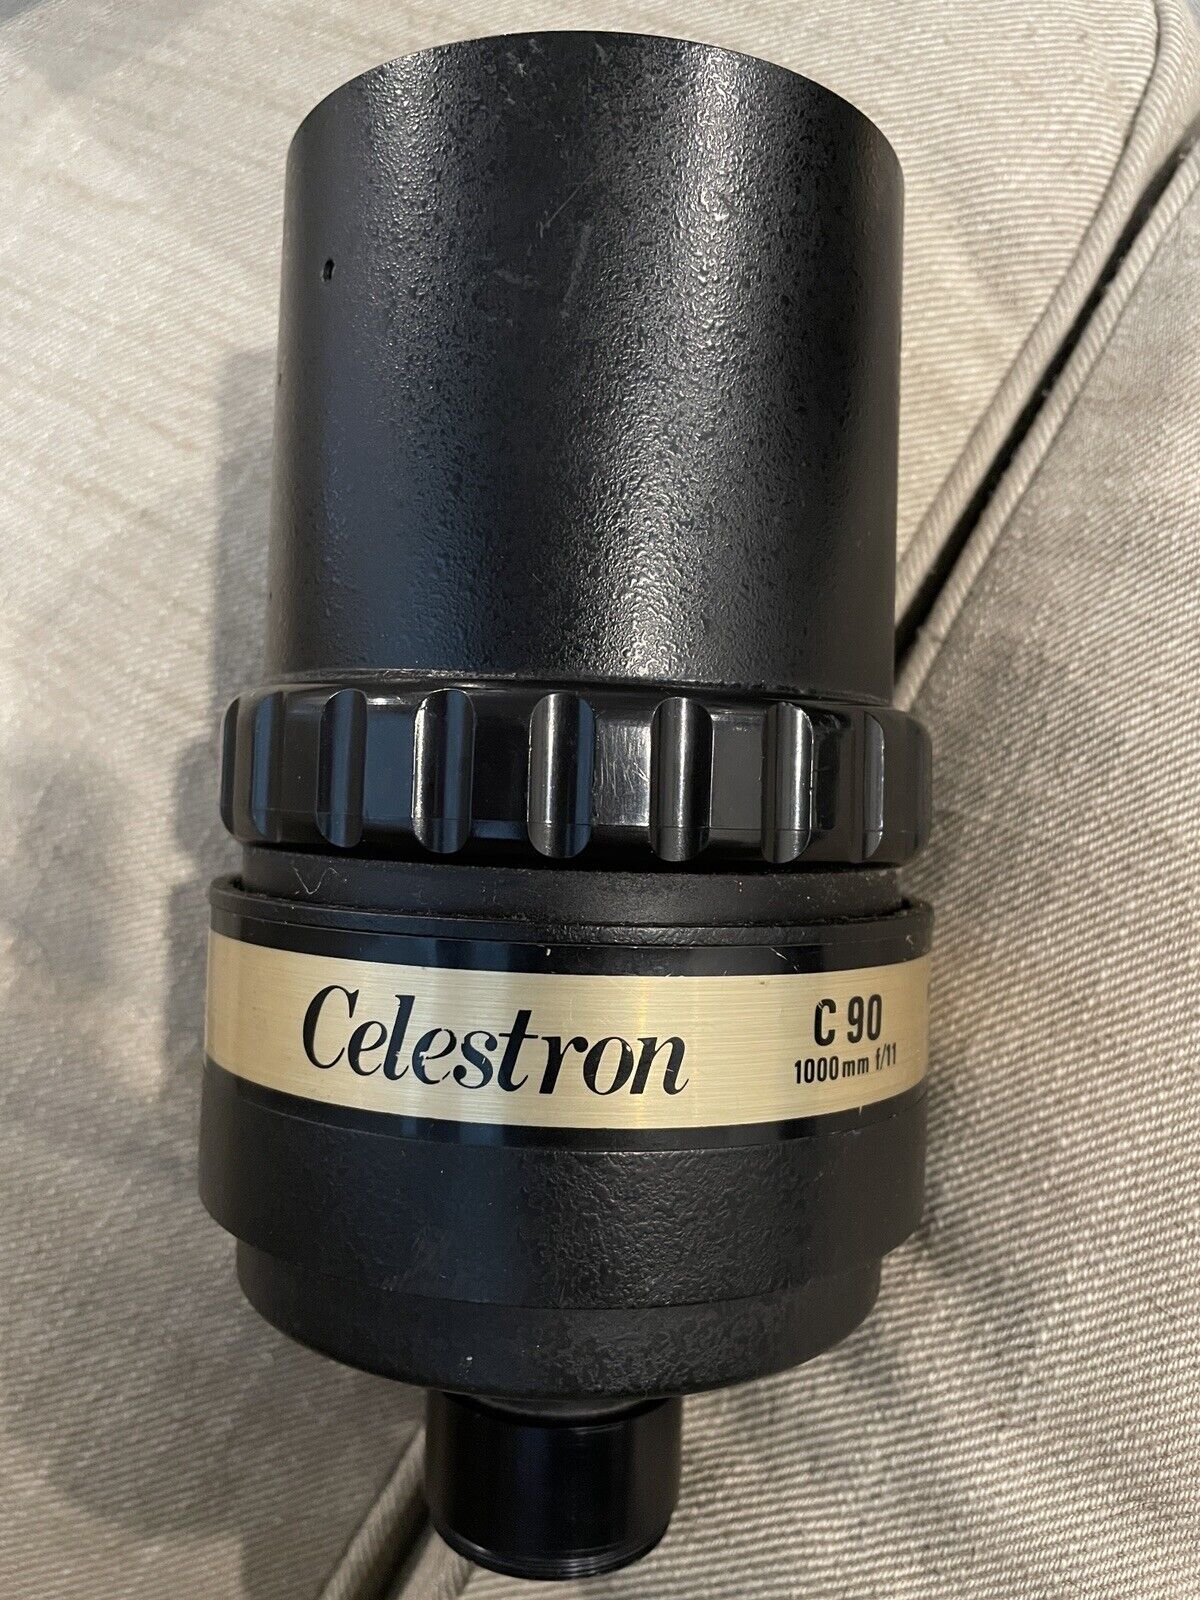 Celestron Telescope C90 1000mm f/11 Mirror Lens - As Is (no cover) S/N 94848